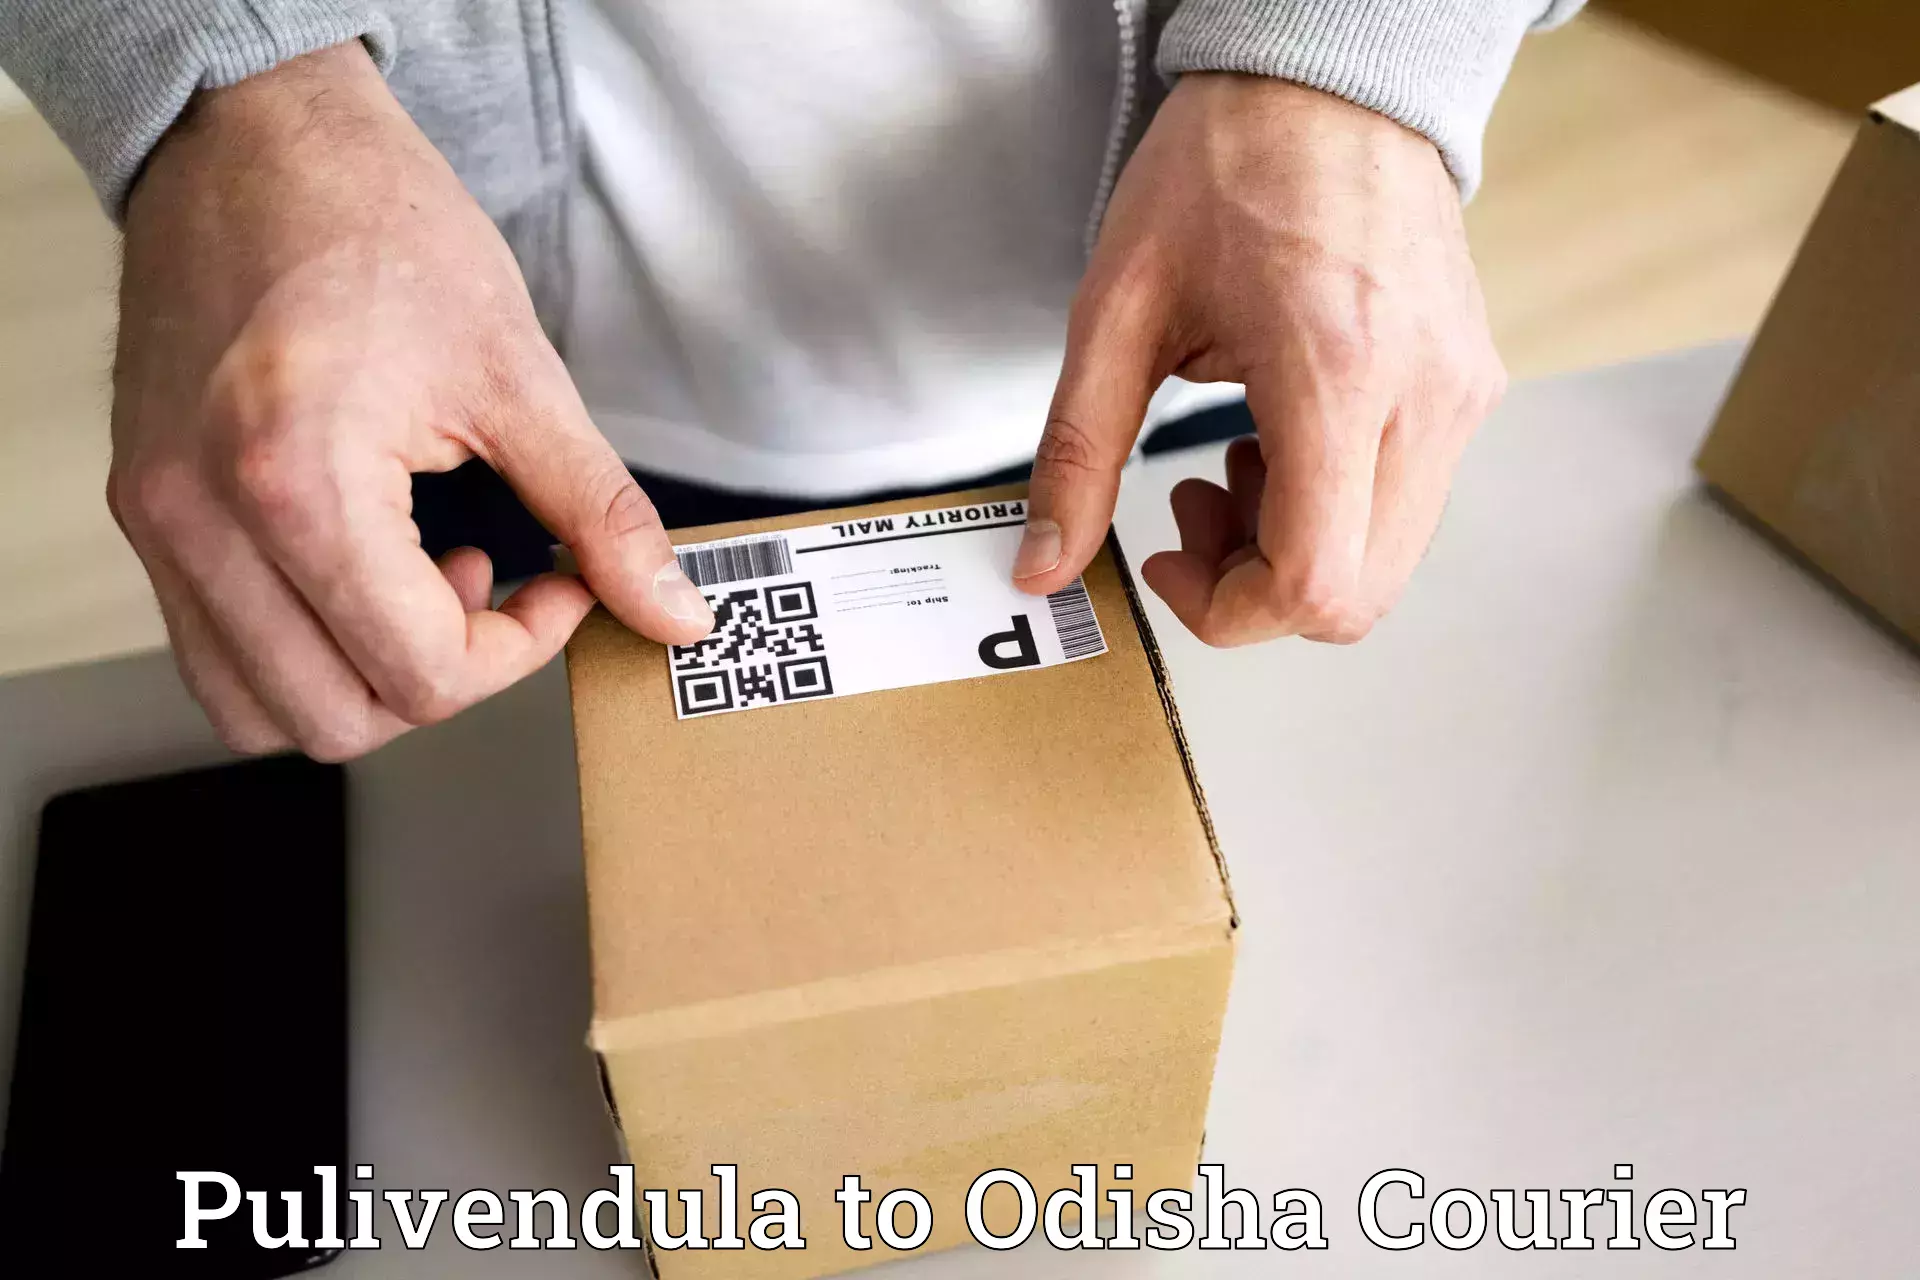 Reliable delivery network Pulivendula to Sundargarh